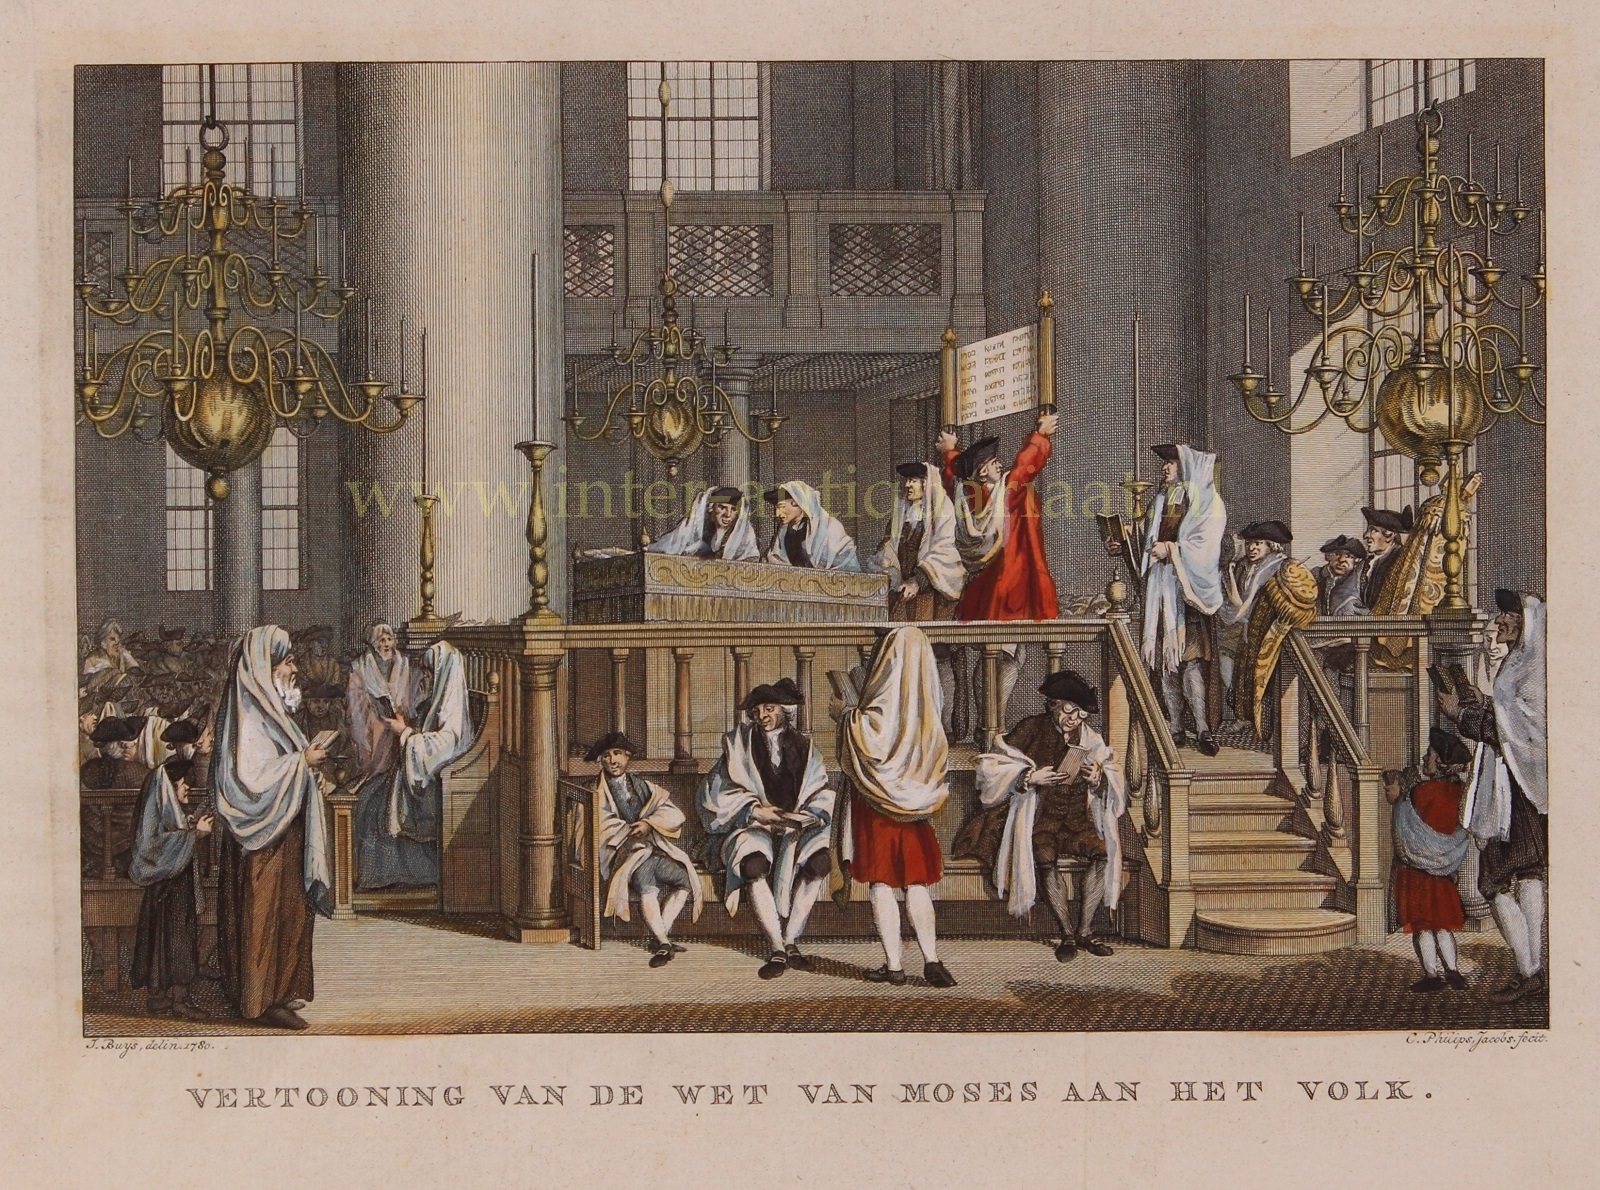 Buys-- Jacobus (1724-1801) - Sabbath in Portugese synagogue Amsterdam - Caspar Philips Jacobsz. after Jacobus Buys, 1781-1791